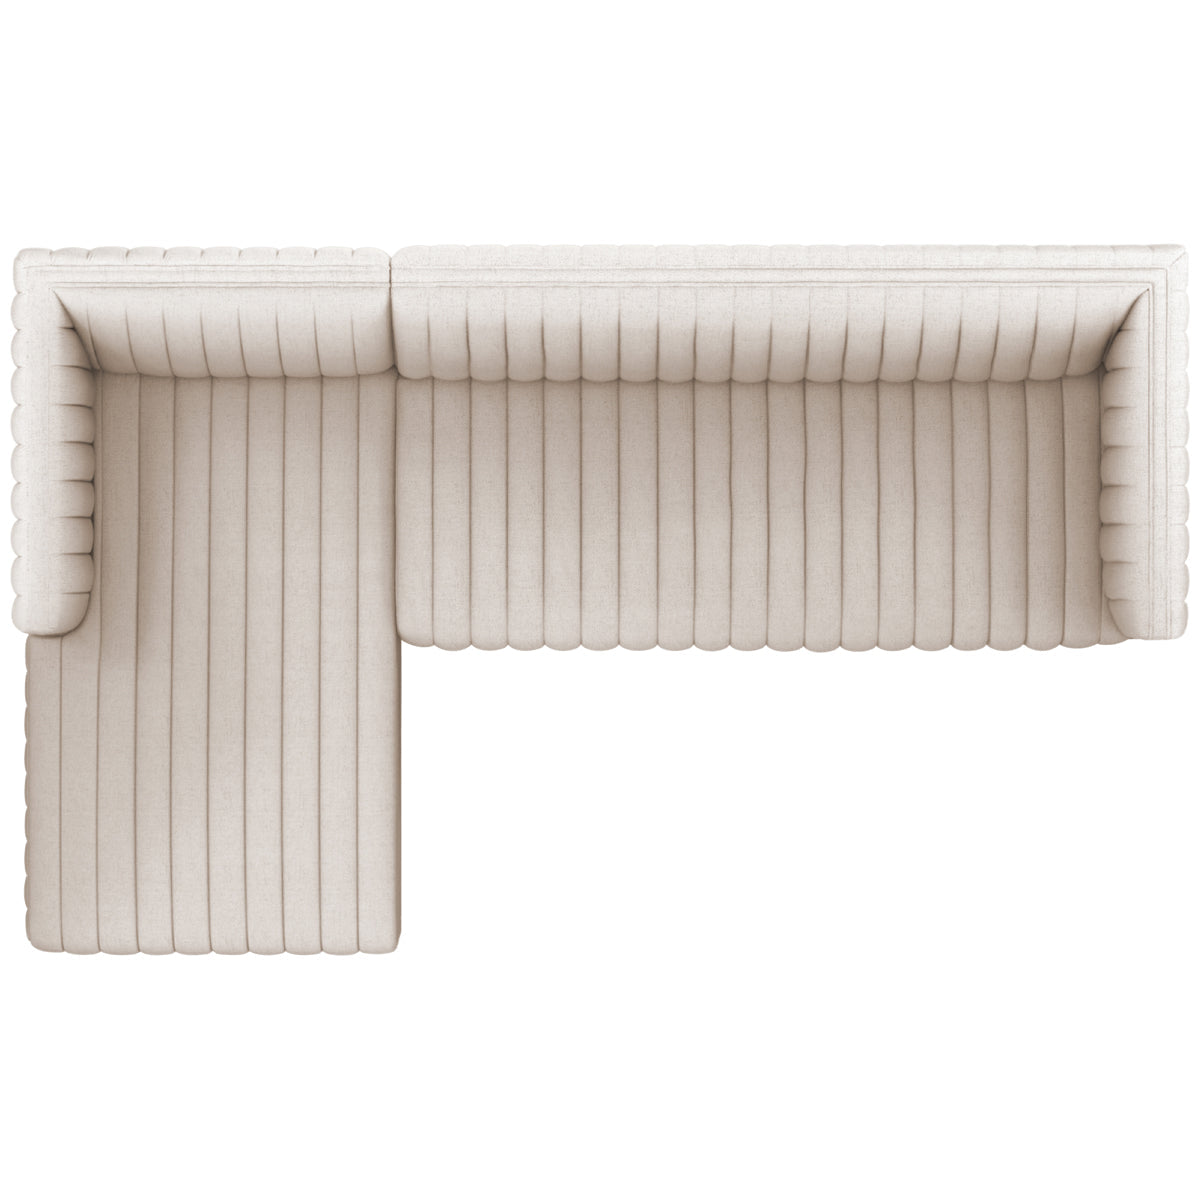 Four Hands Grayson Augustine 2-Piece Sectional - Dover Crescent